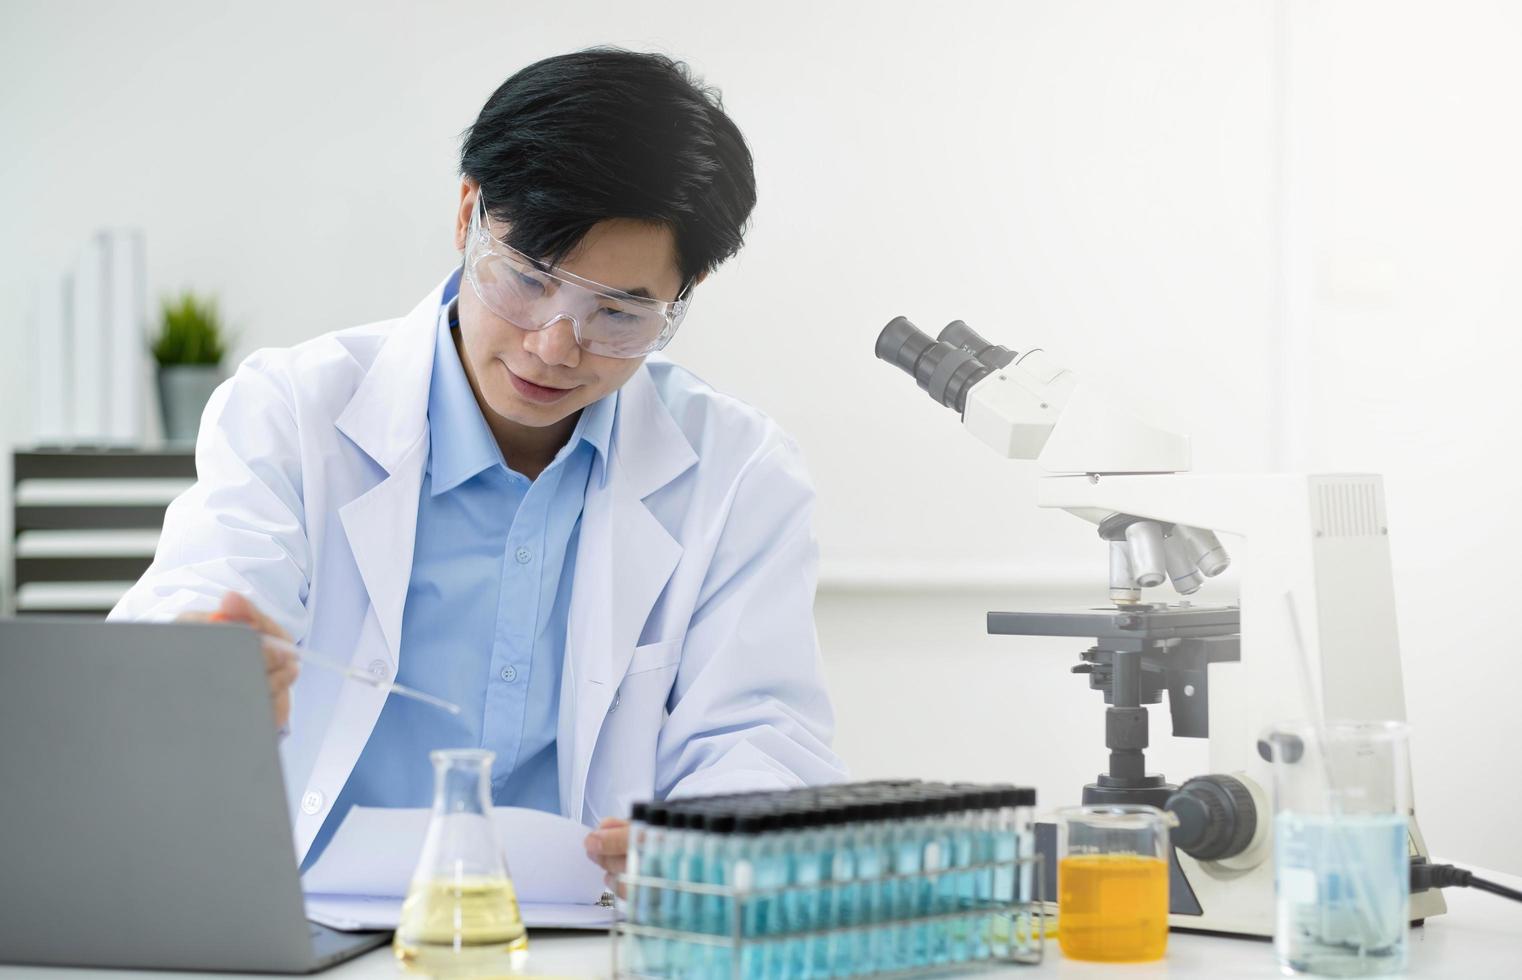 Medical Research Laboratory Portrait of a Handsome Male Scientist Using Digital Tablet Computer, Analysing Liquid Biochemicals in a Laboratory Flask. photo